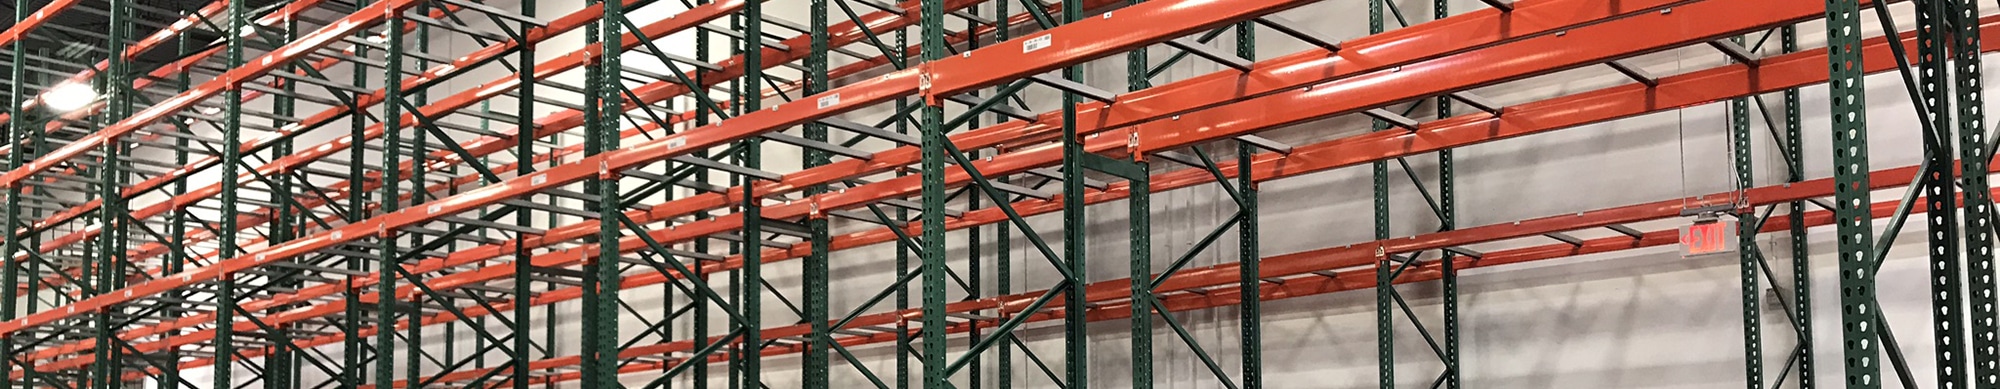 Pallet Rack Products and Services by Alliance Pallet Rack